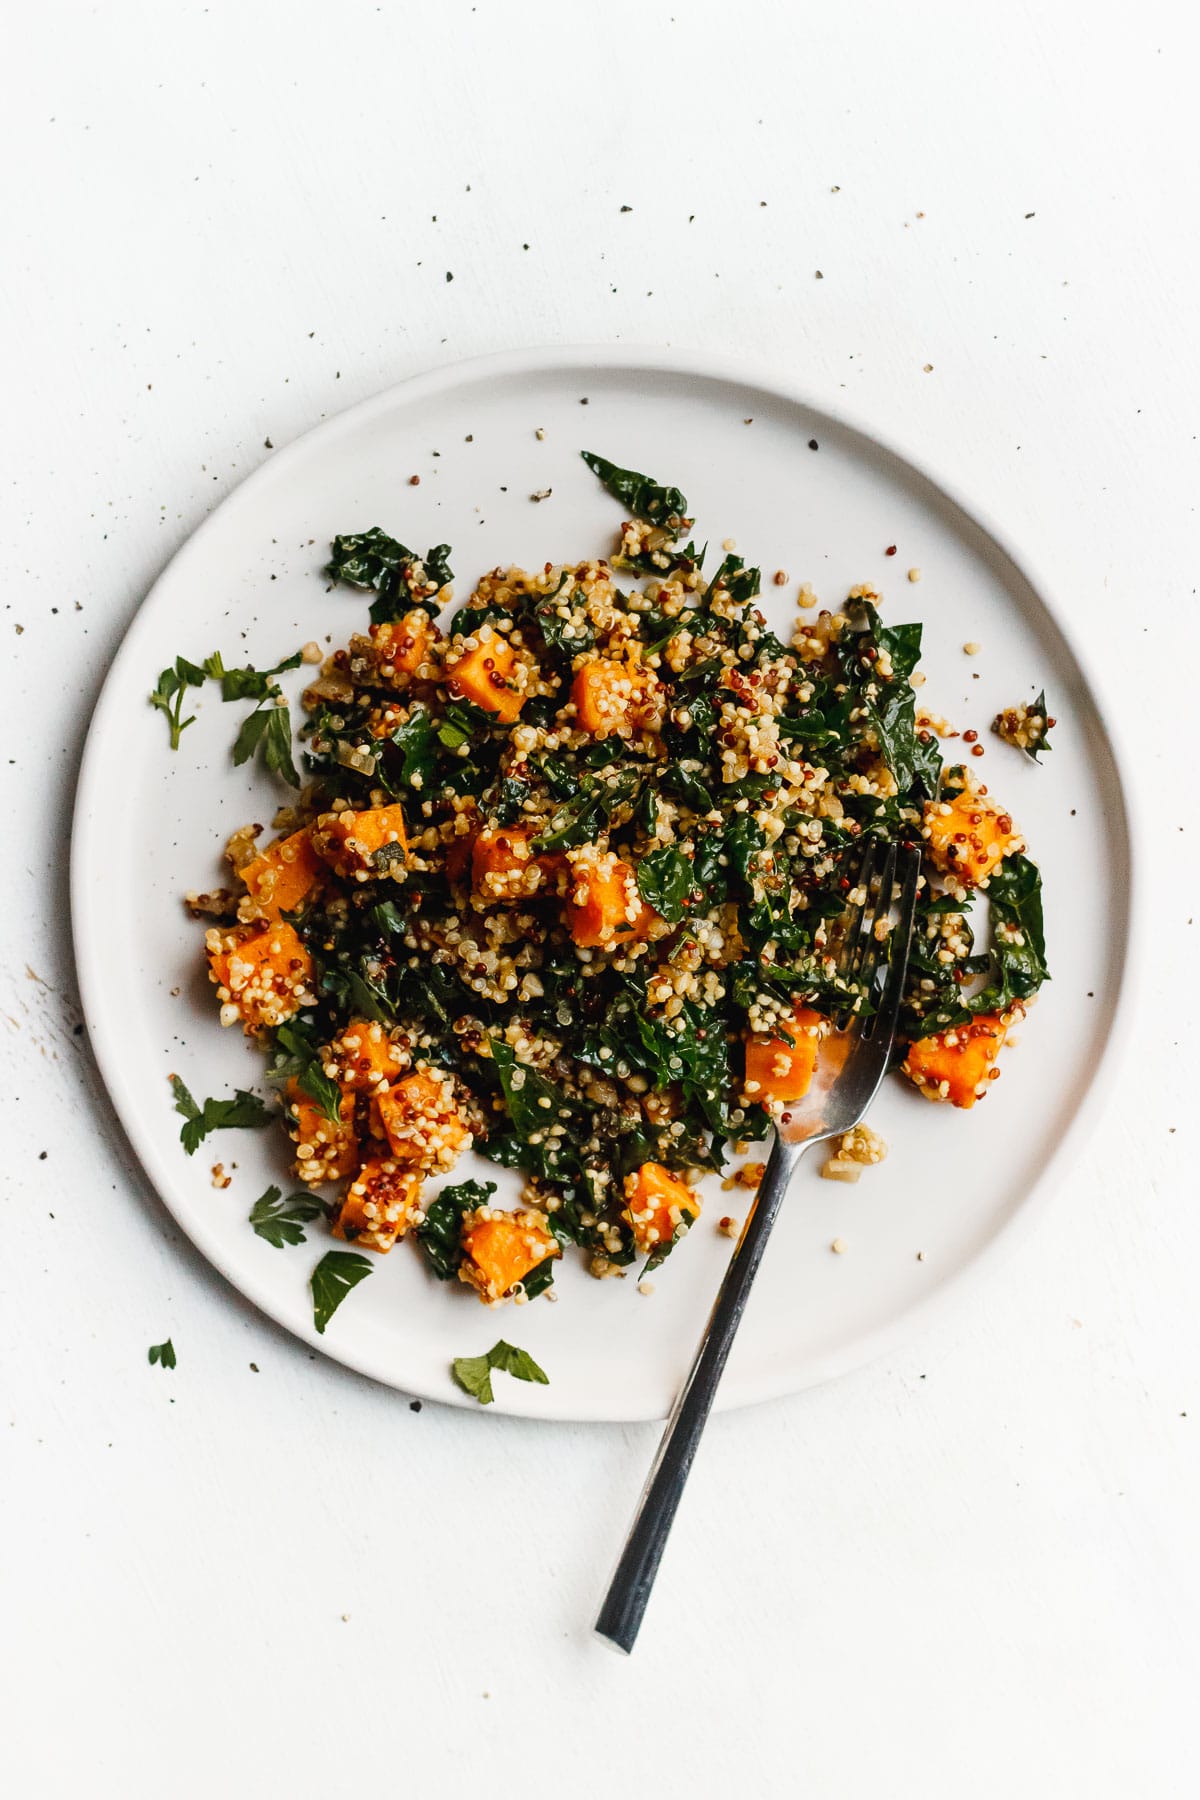 SWEET POTATO QUINOA SKILLET WITH KALE AND SAGE